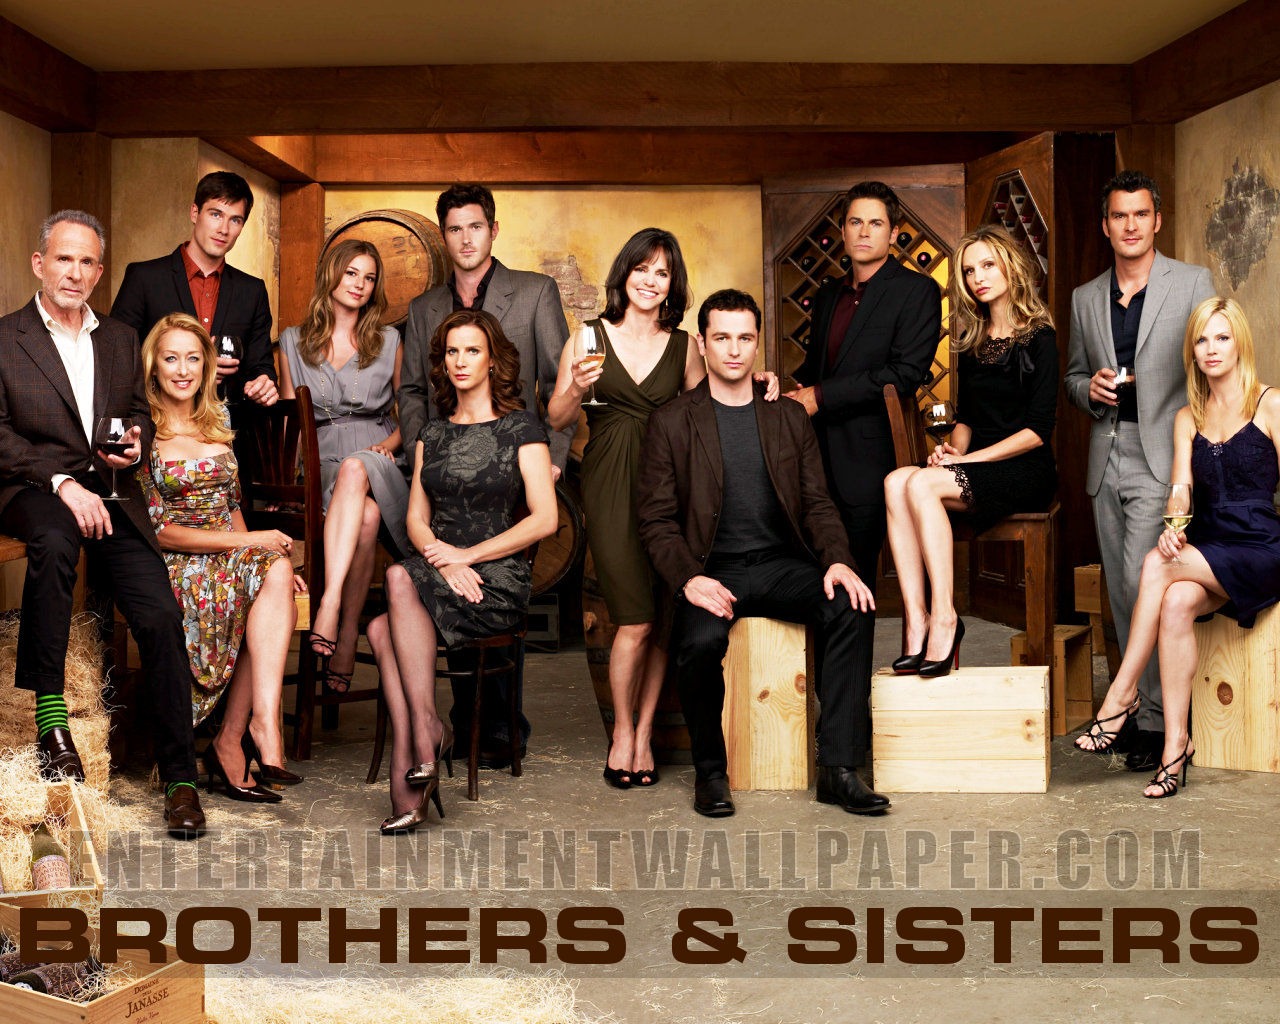 Brothers & Sisters 兄弟姐妹 #27 - 1280x1024